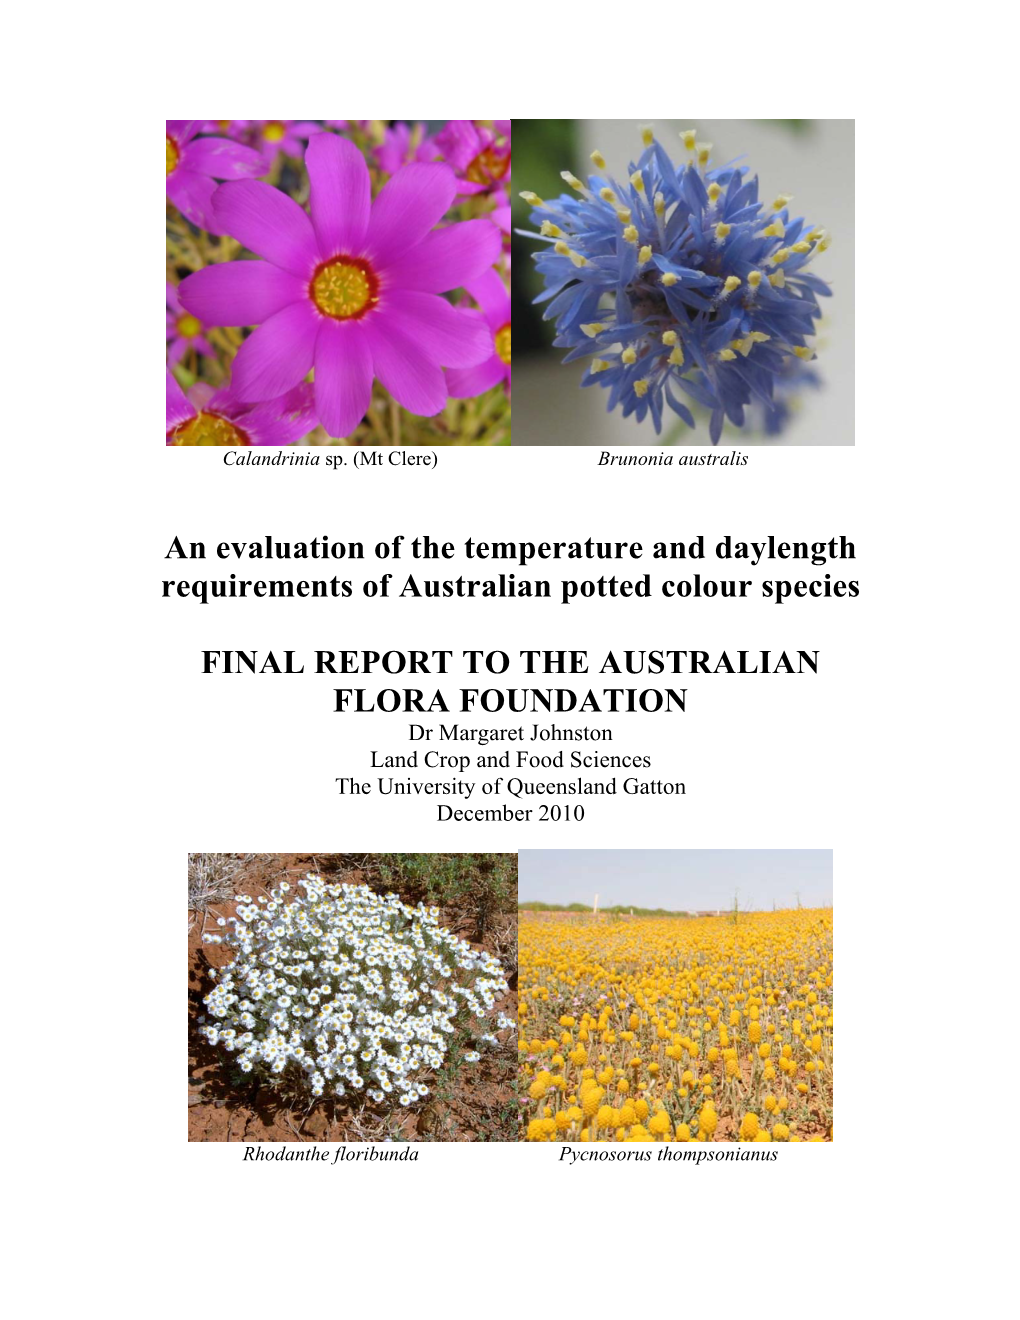 FINAL REPORT to the AUSTRALIAN FLORA FOUNDATION Dr Margaret Johnston Land Crop and Food Sciences the University of Queensland Gatton December 2010